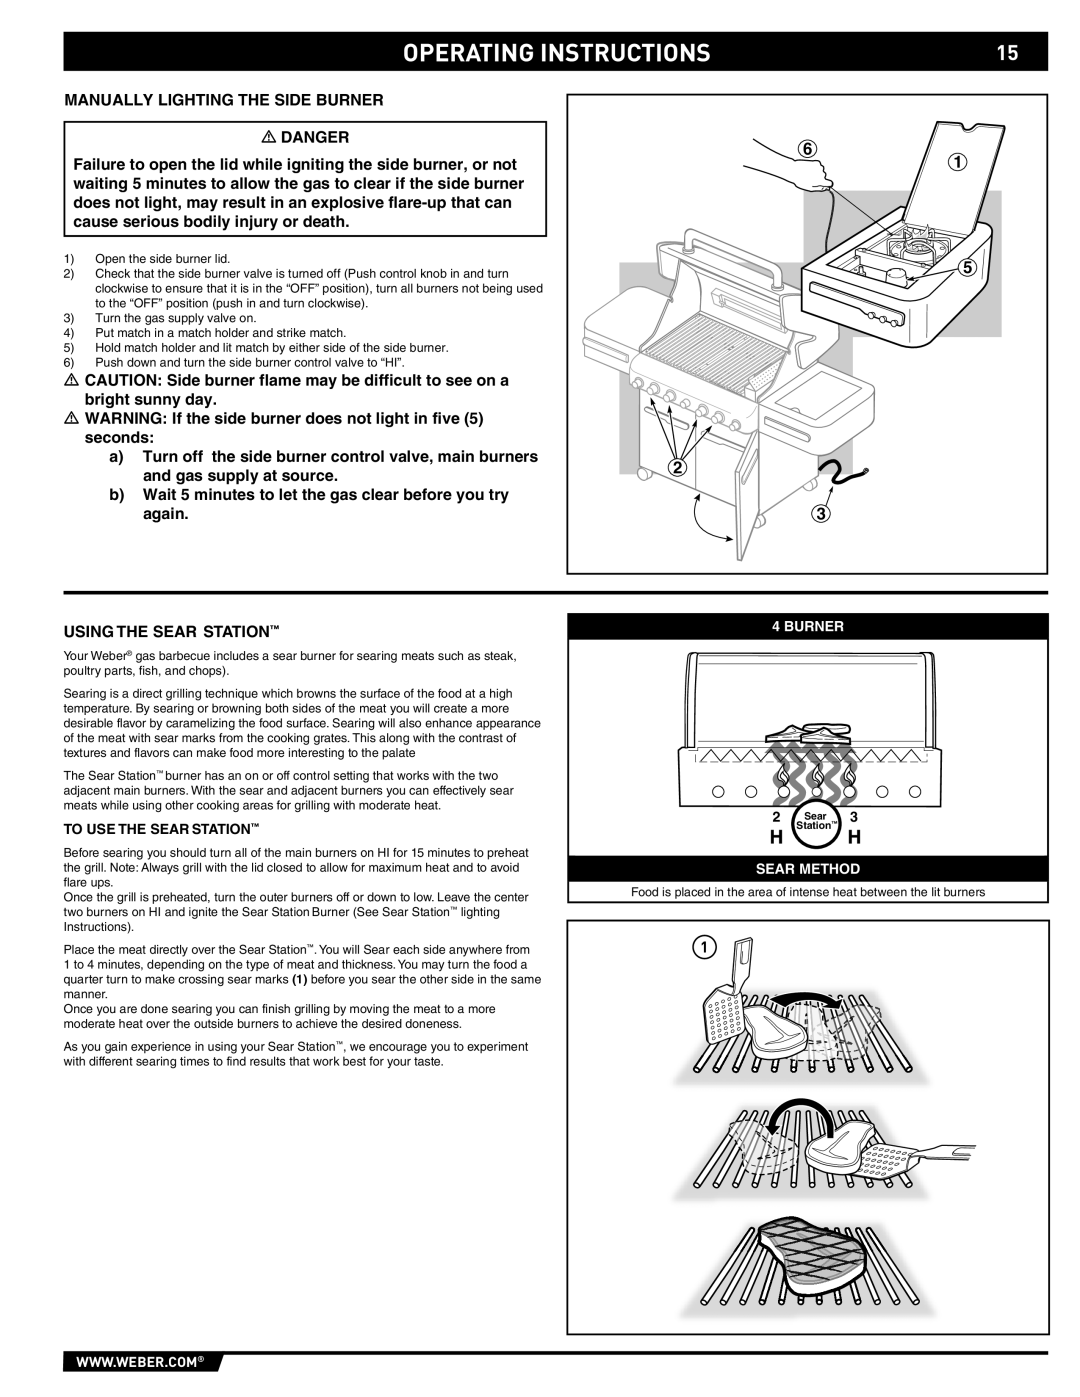 Weber S-470TM manual Operating Instructions, To Use The Sear Station, Burner, Sear Method 